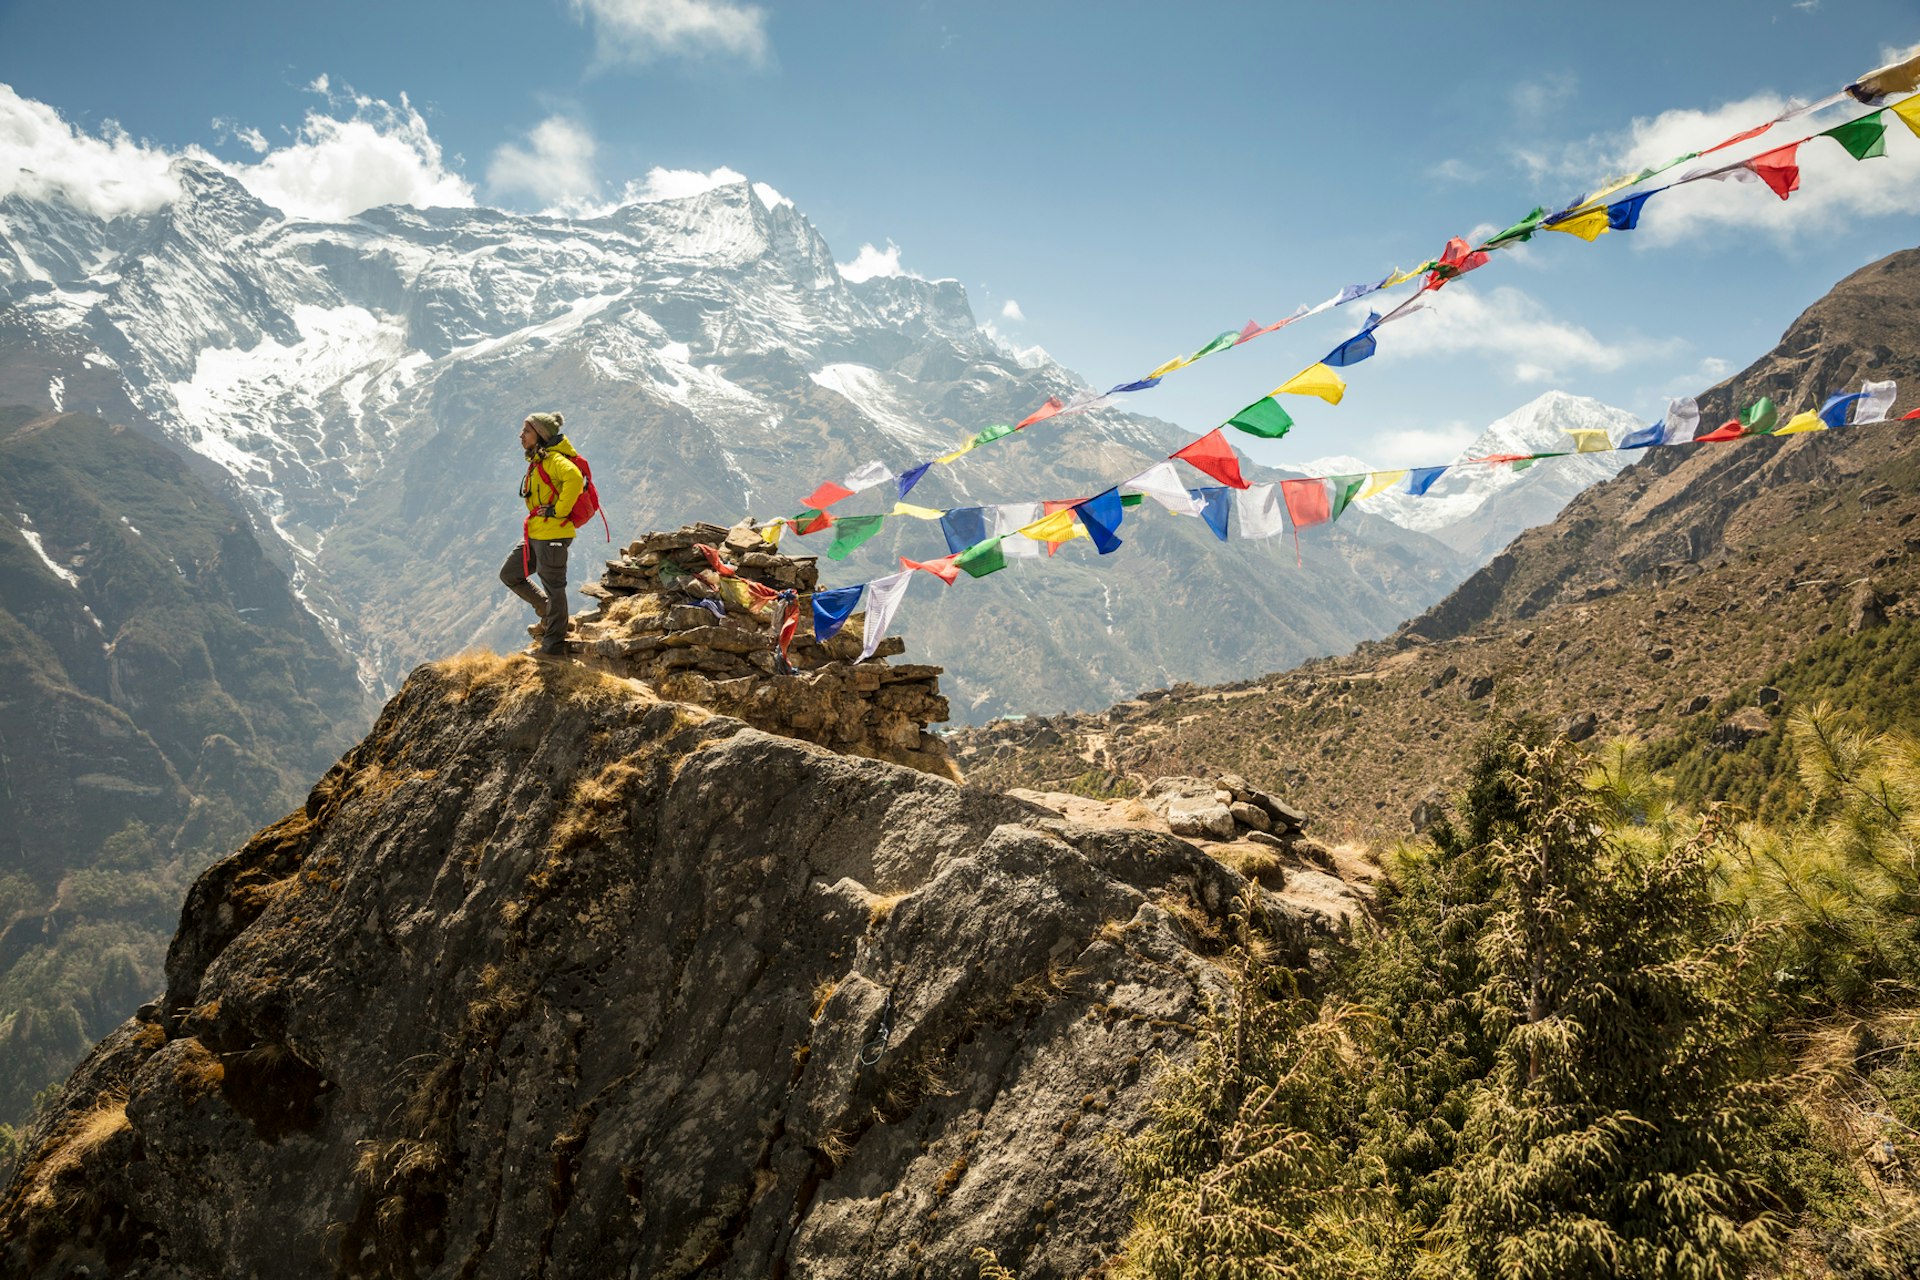 A hiker stands at the top of a tall mountain in Nepal with brightly-colored prayer flags flapping in the wind